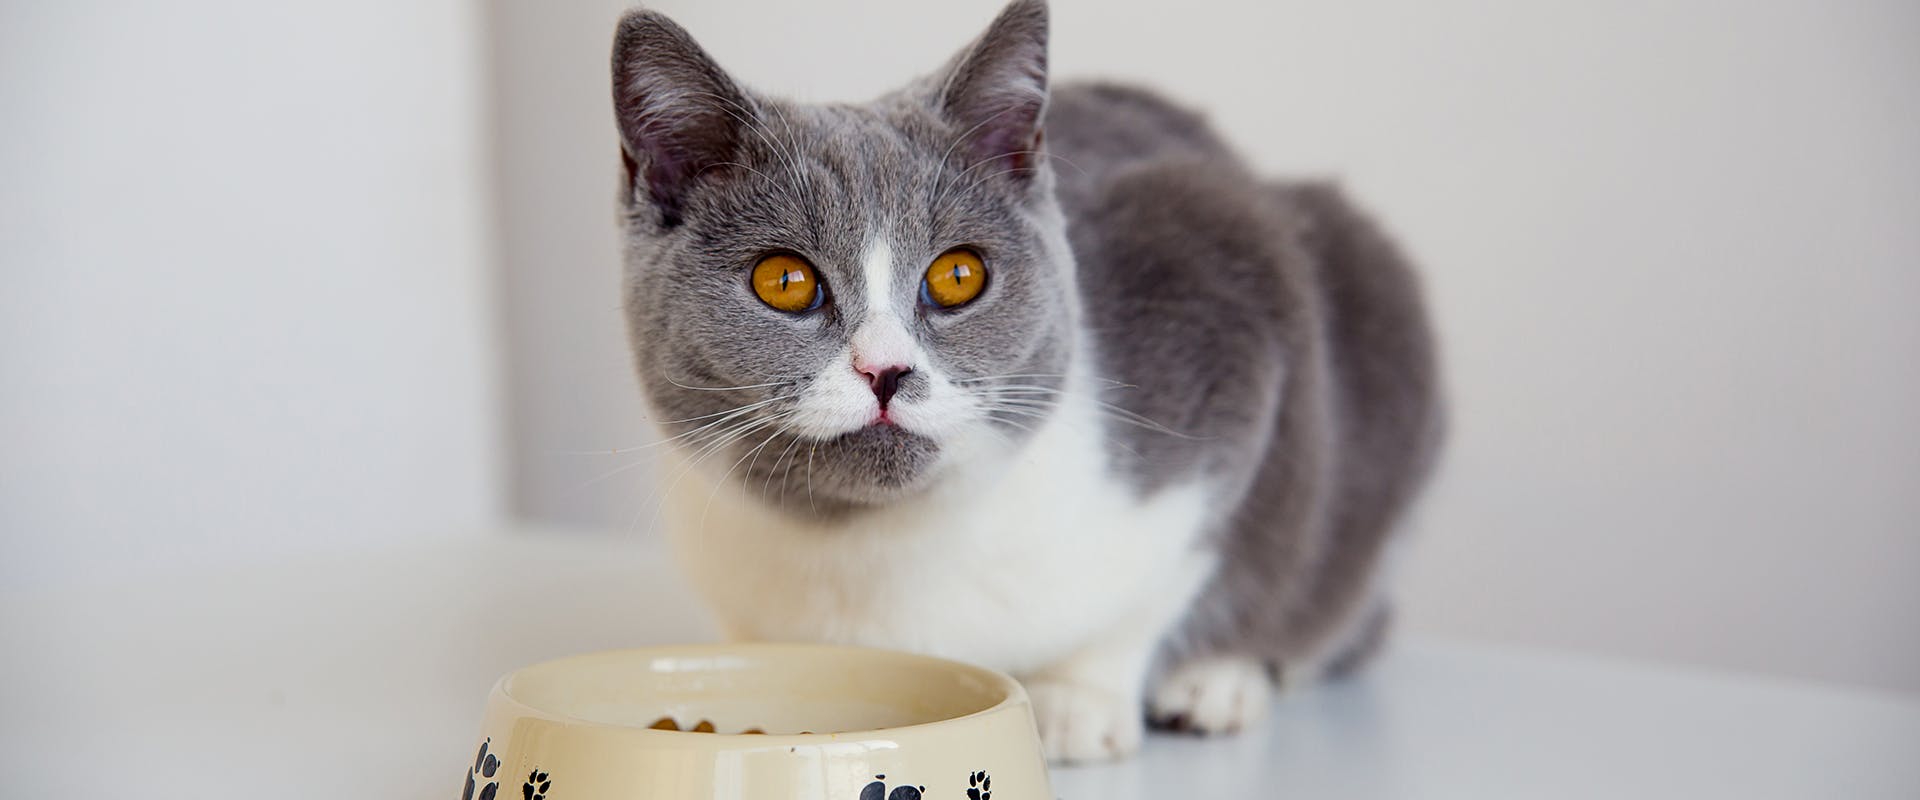 A cat looking up, with a full bowl of food on the floor